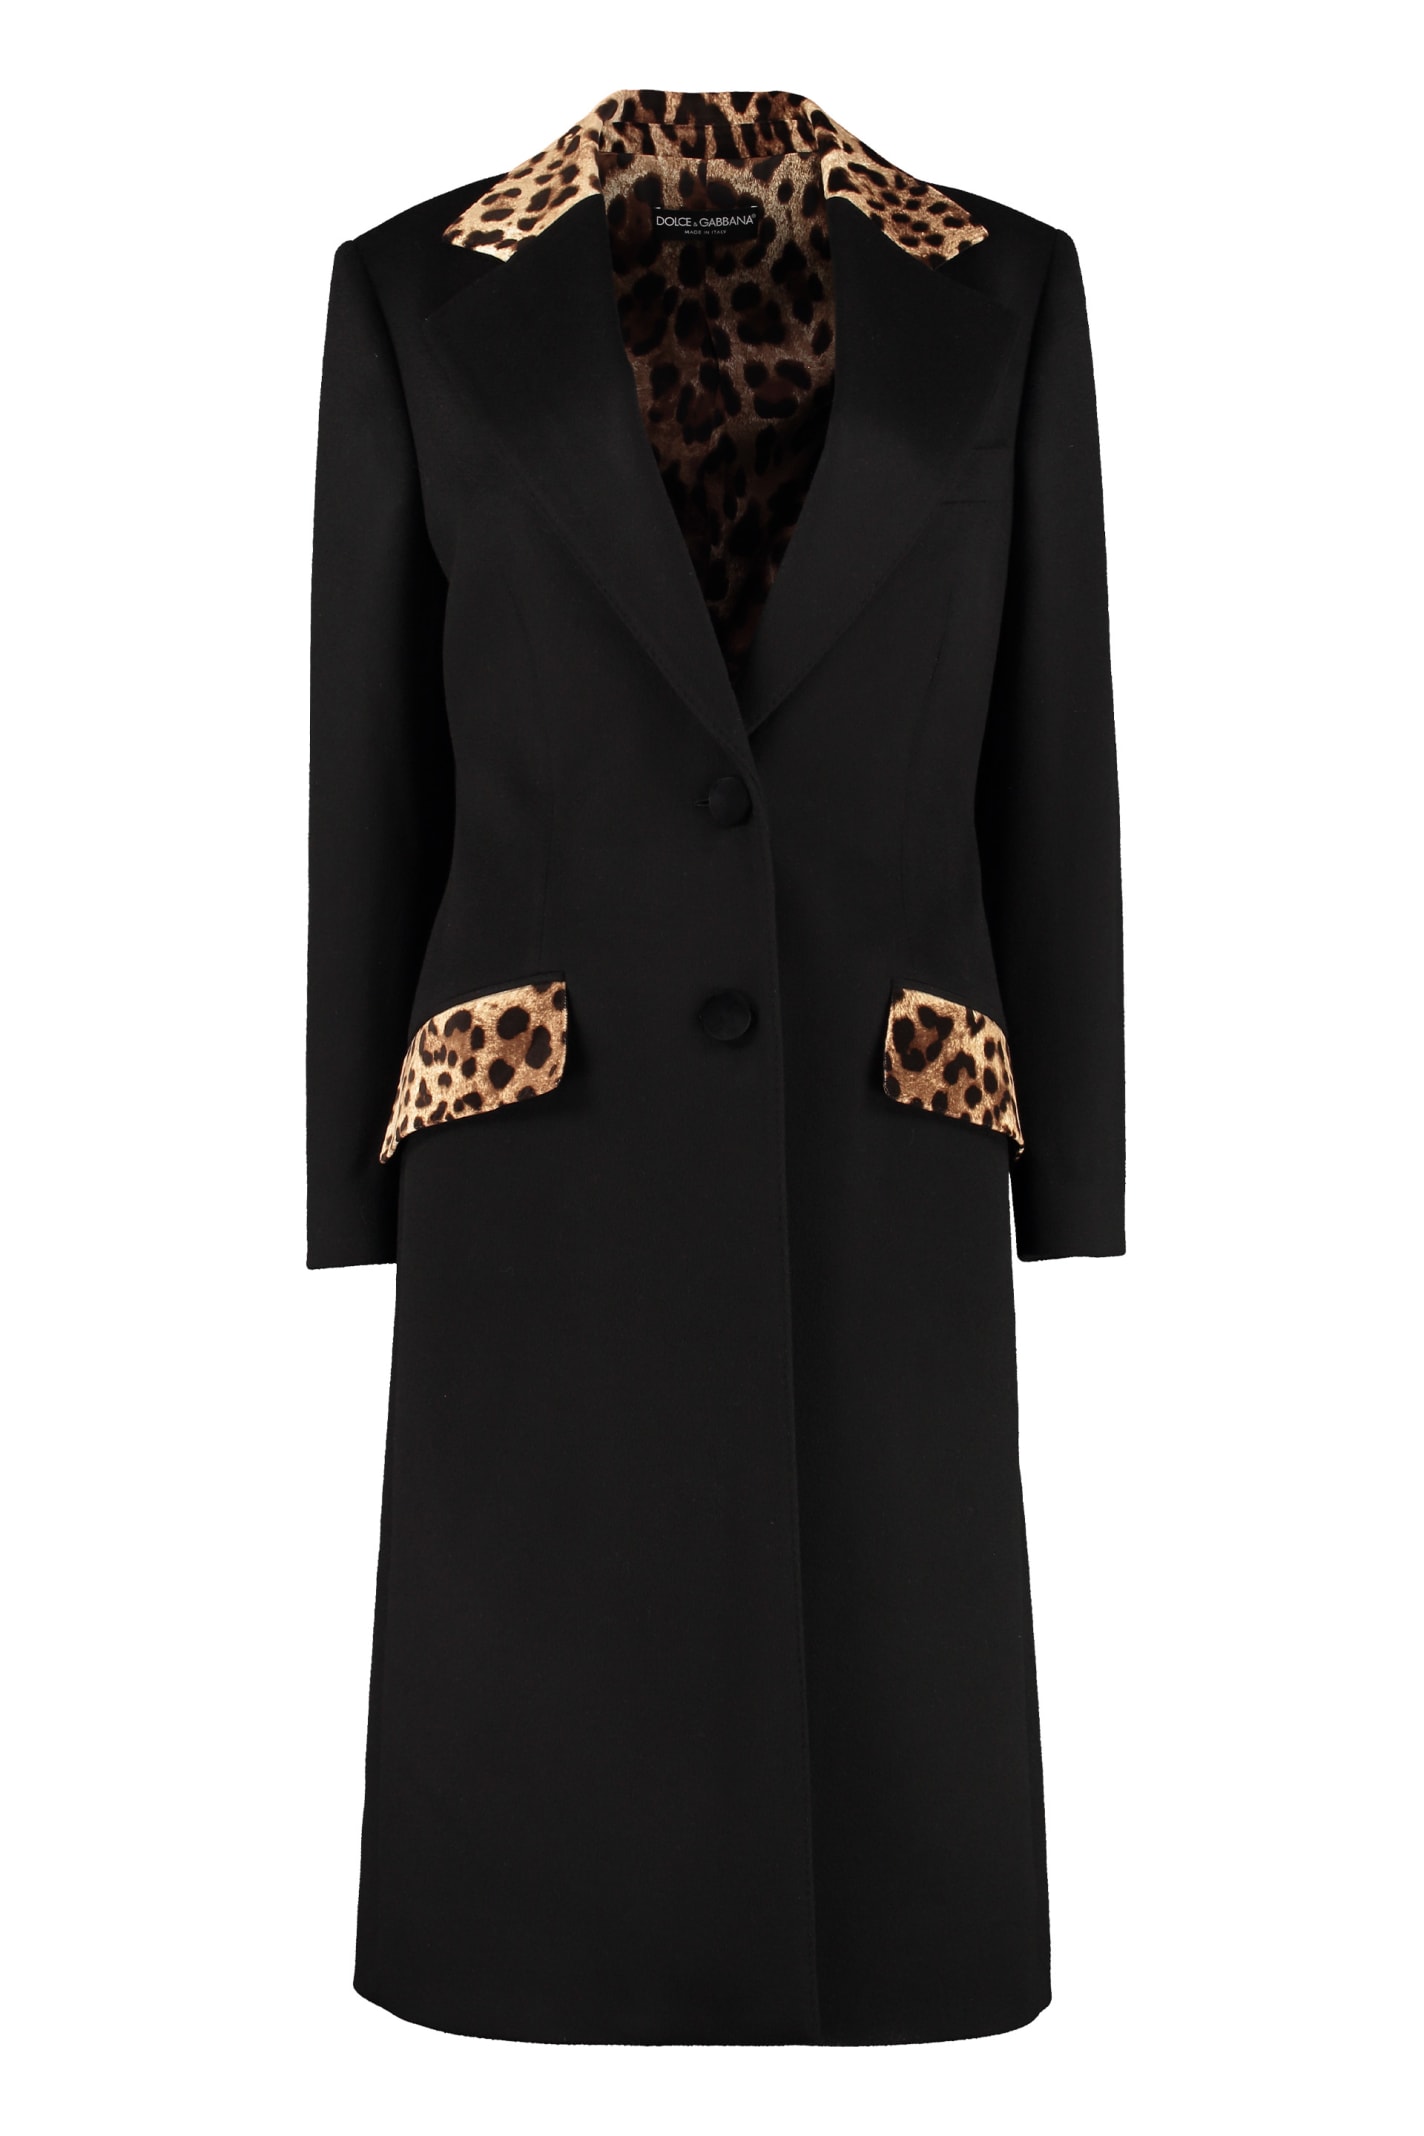 DOLCE & GABBANA WOOL AND CASHMERE COAT,11171539